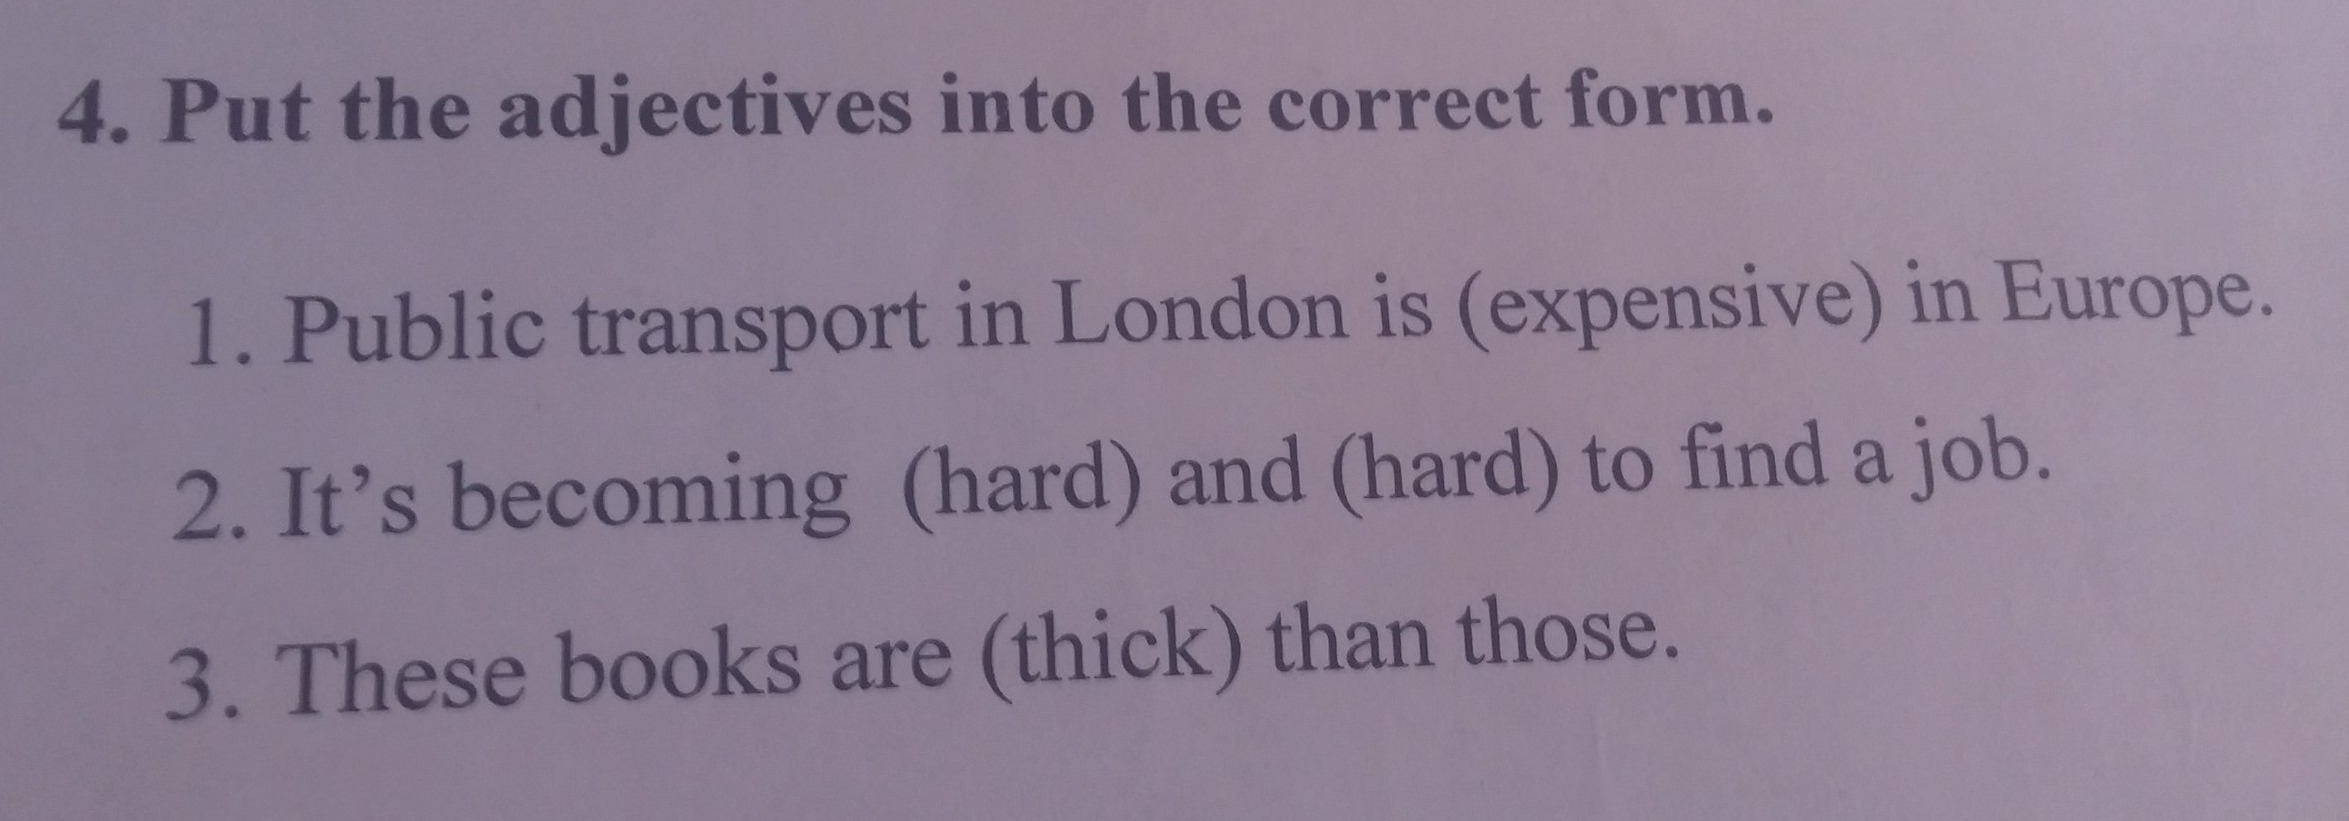 Put the adjectives into the correct. Put the adjectives in the correct form. Put the adjectives into the correct forms much. Put the adjectives into the correct forms that s.